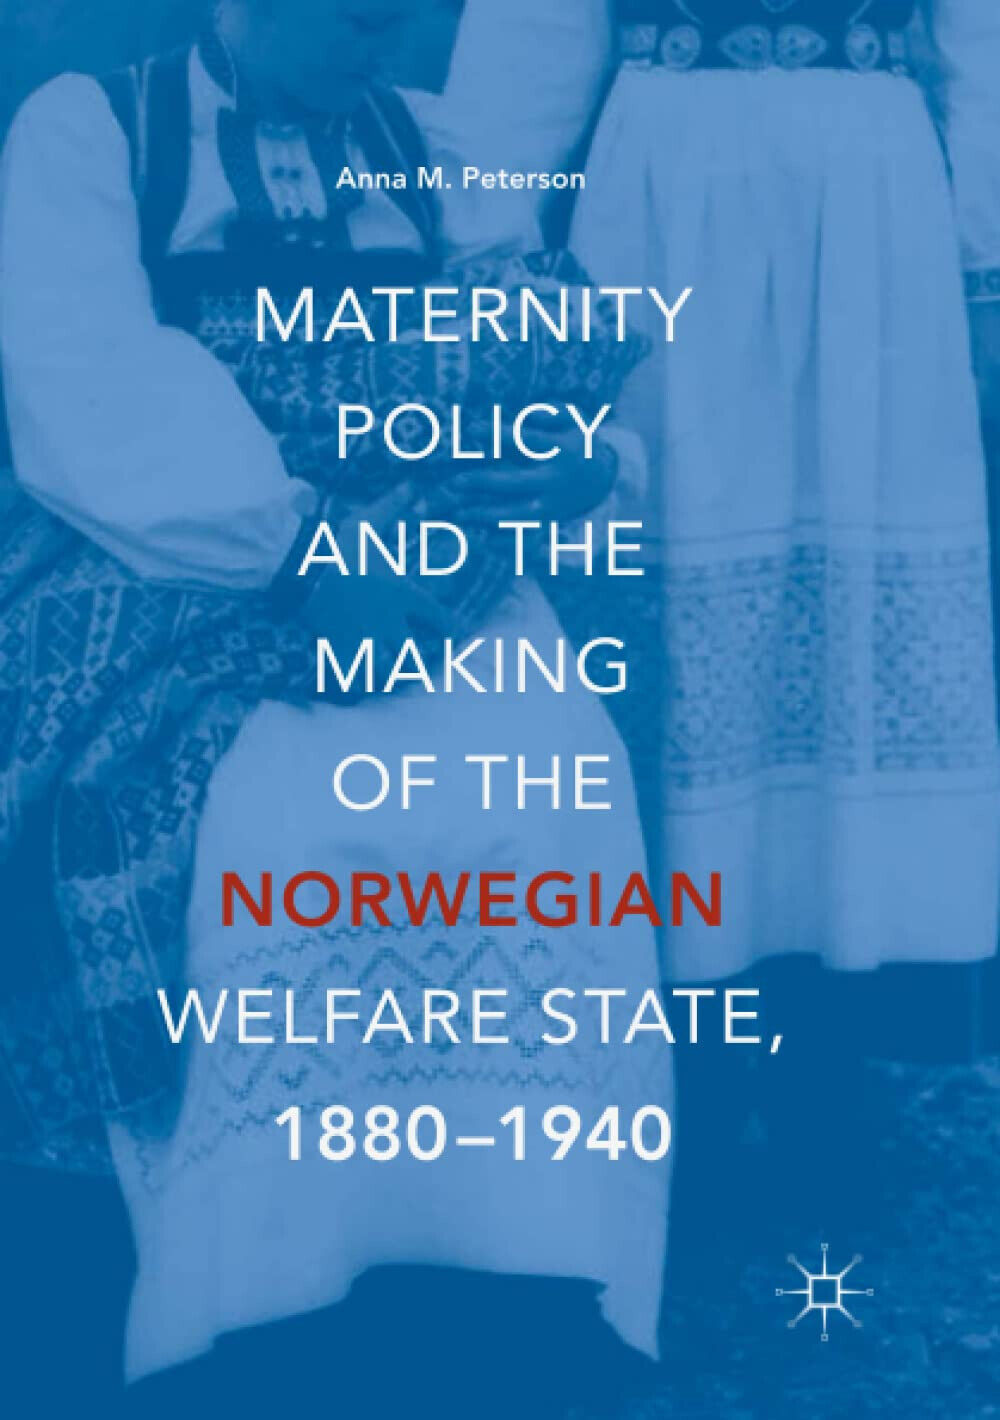 Maternity Policy and the Making of the Norwegian Welfare State, 1880-1940 - 2019